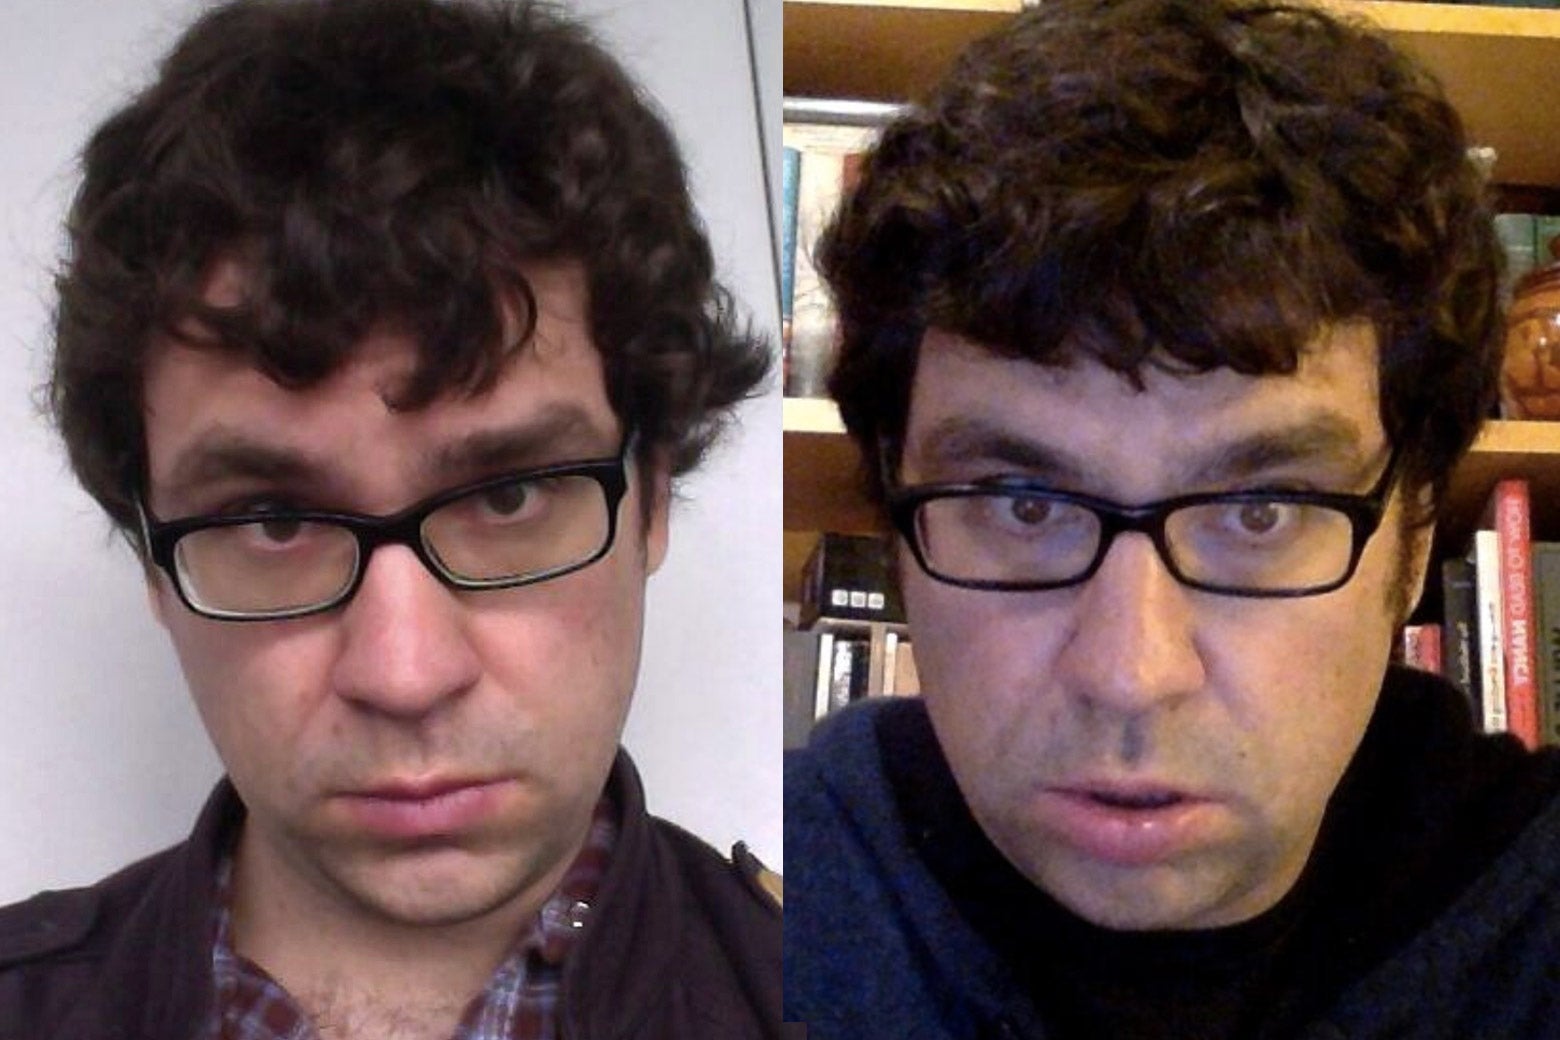 Justin Peters makes the same expression six years apart.